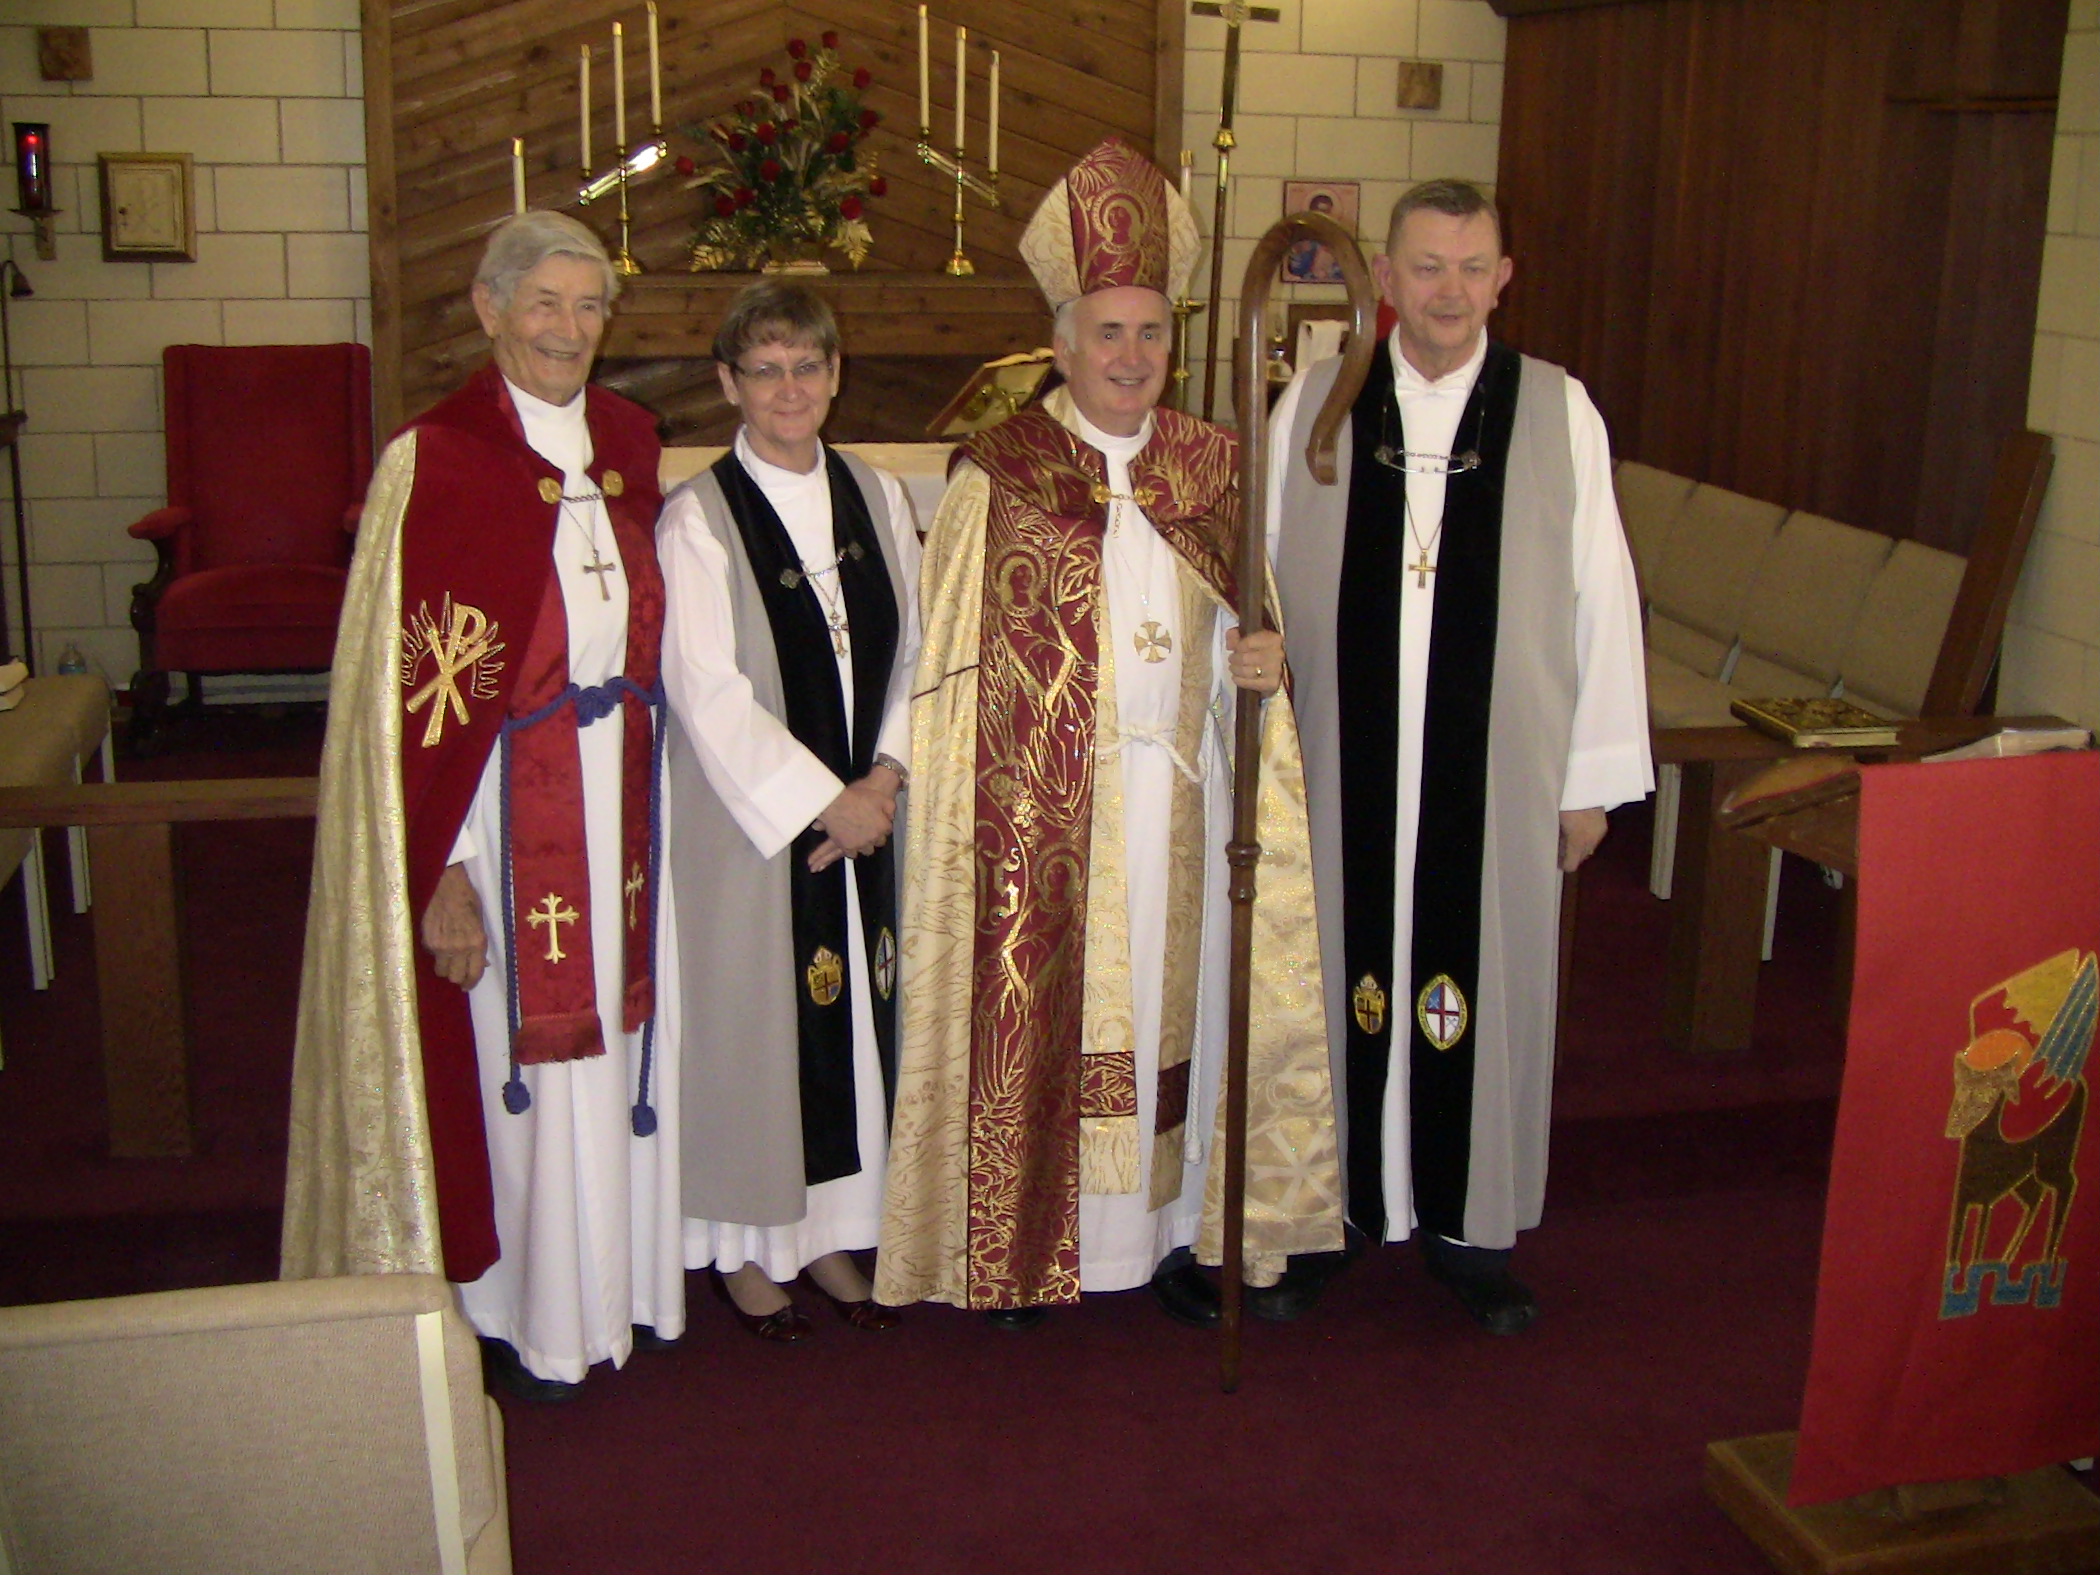 a priest and three men are standing together